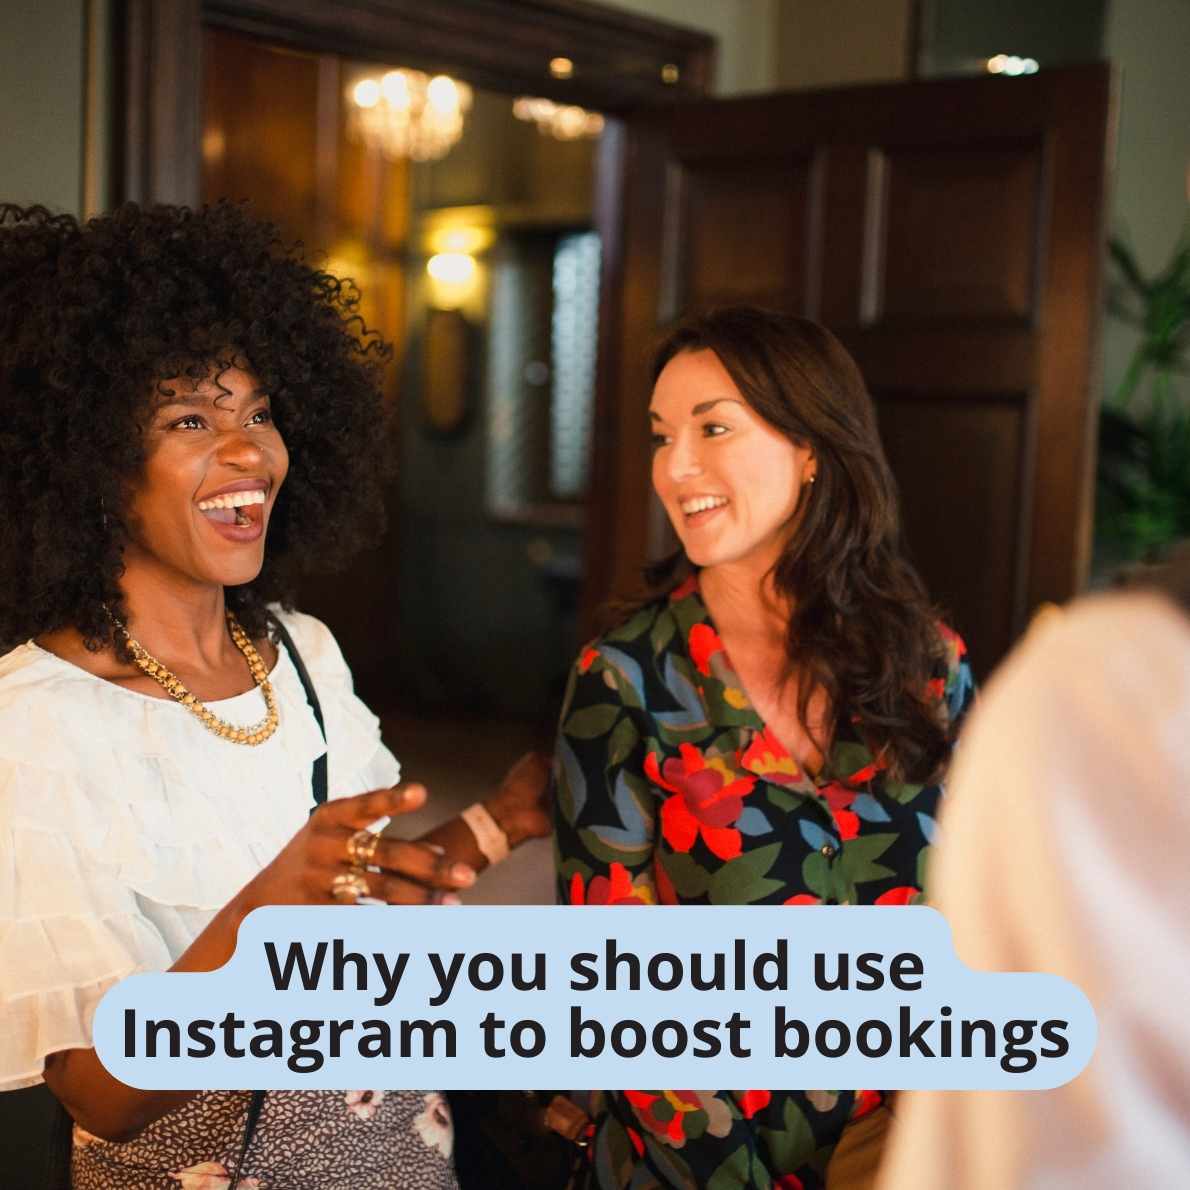 freetobook why you should use instagram to boost bookings